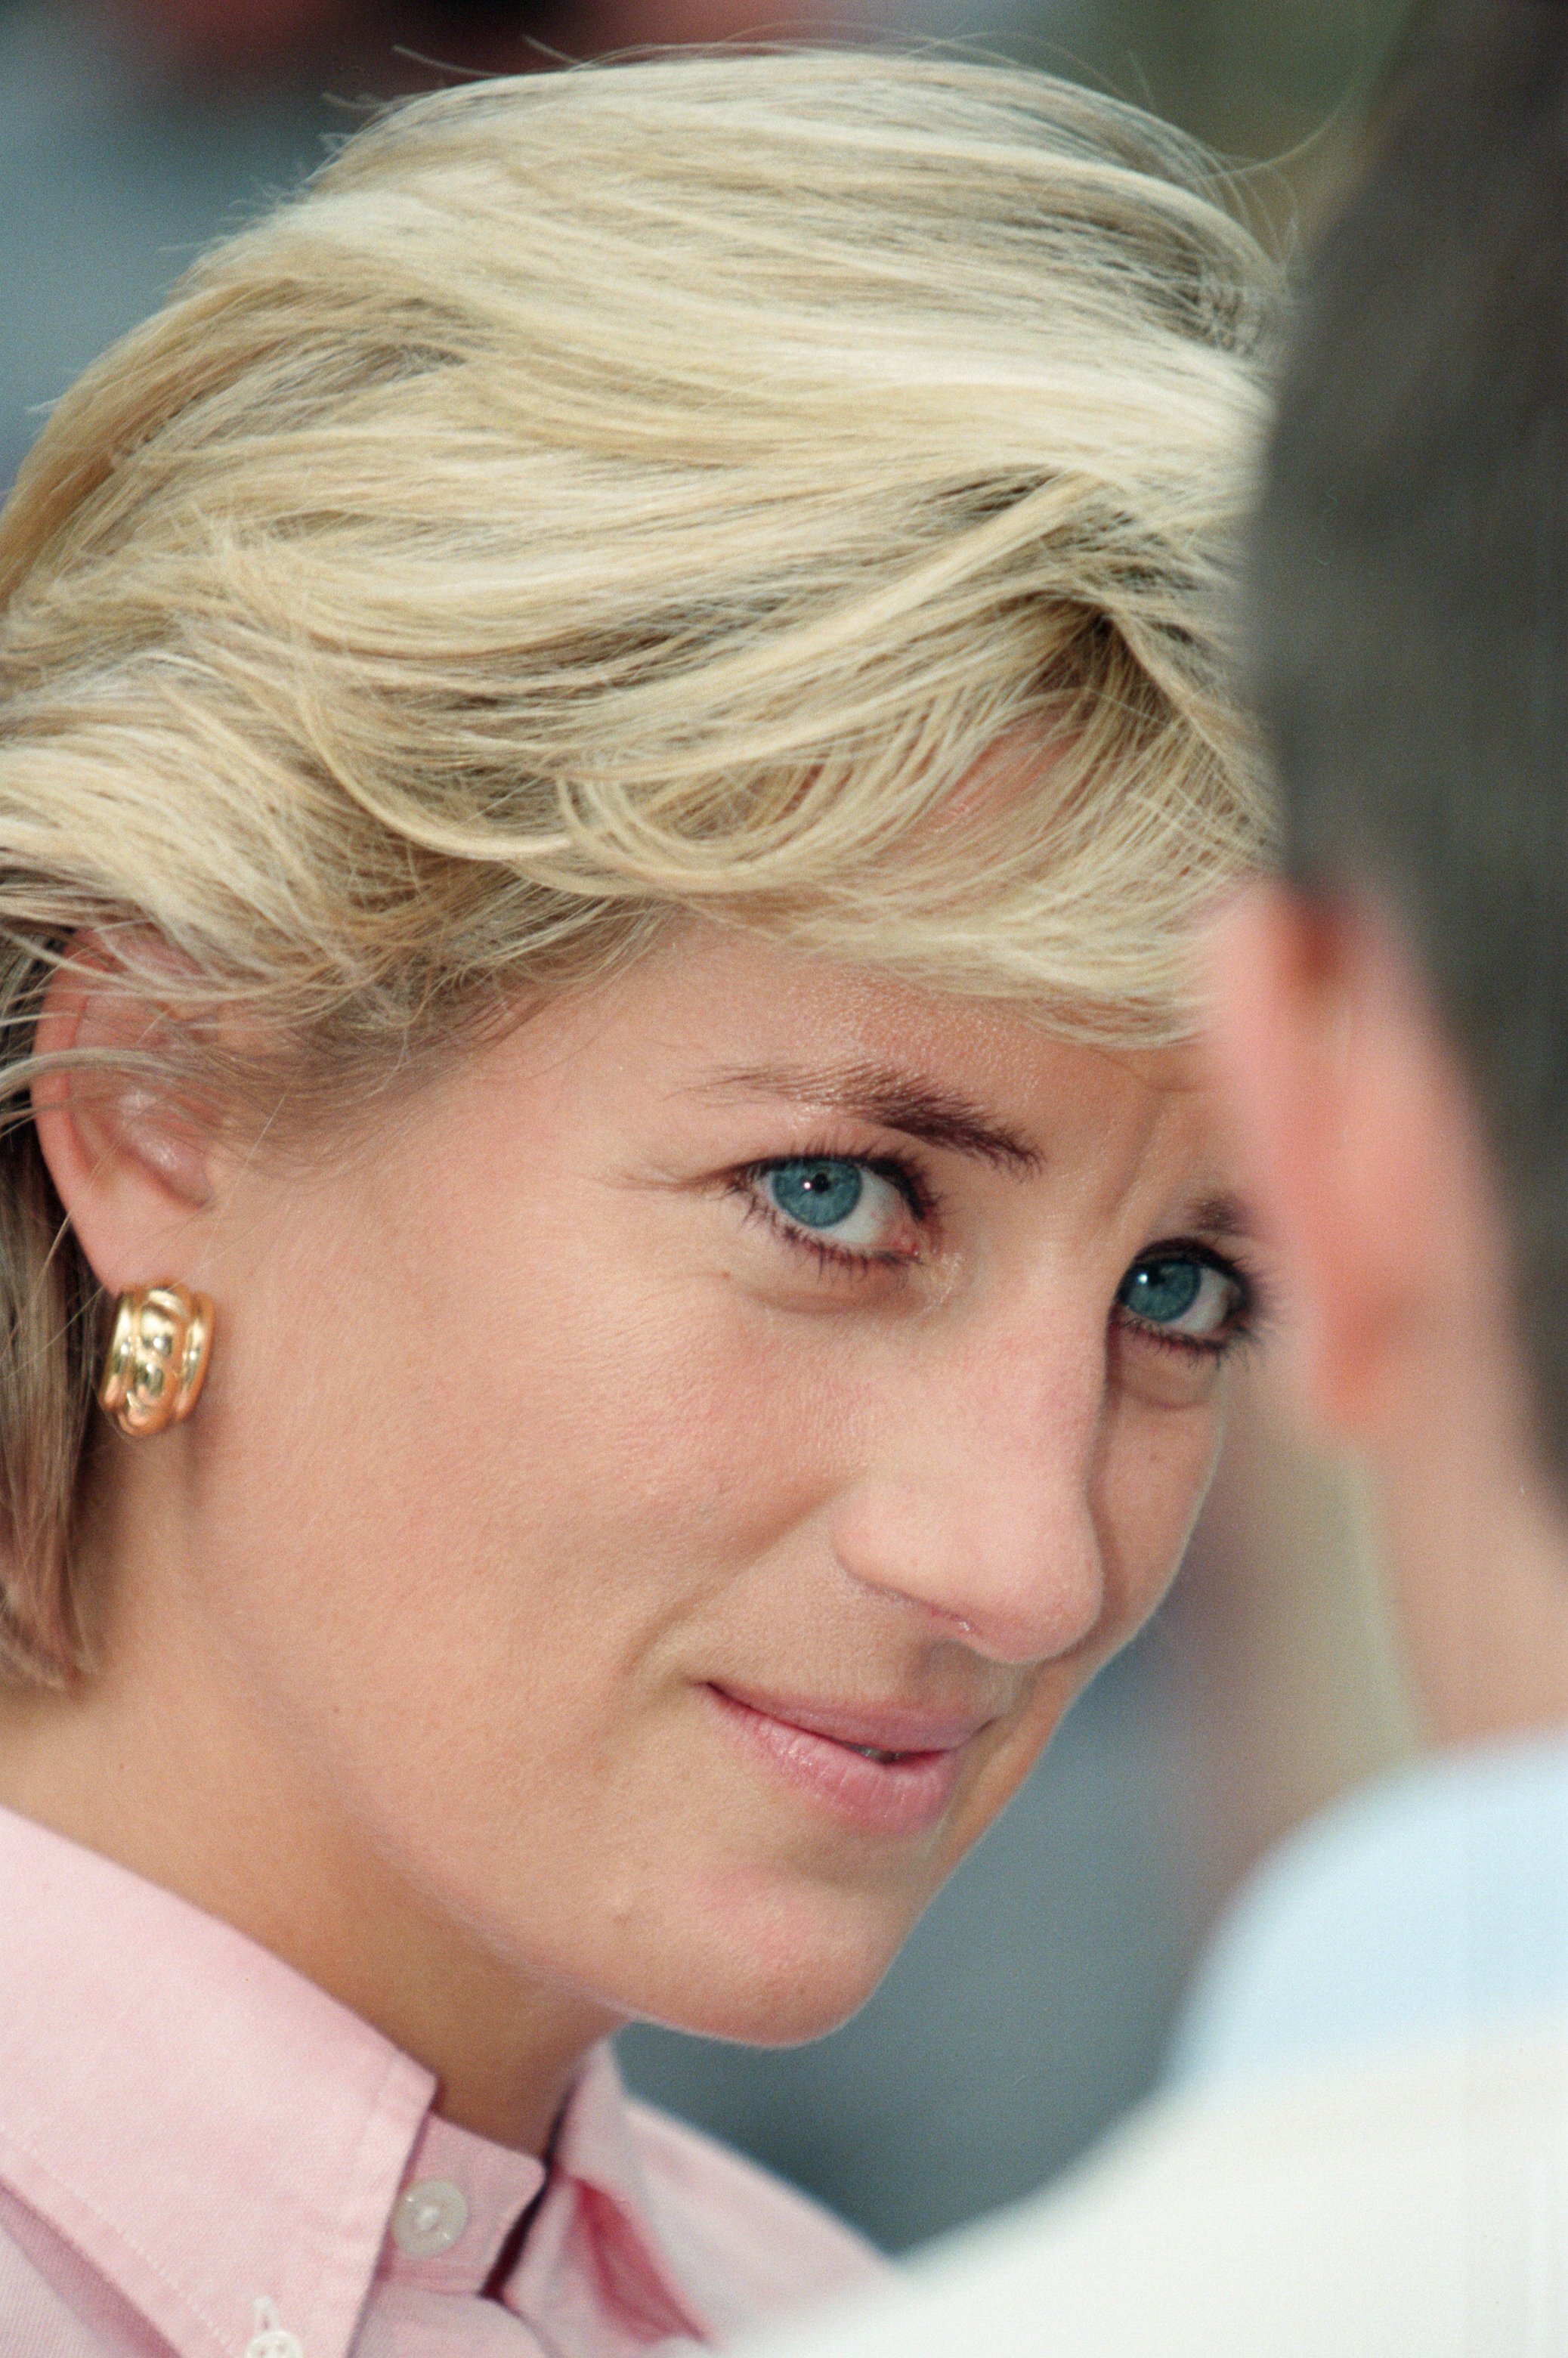 Diana, Princess of Wales during her three day visit to Bosnia - Herzegovina on August 10, 1997. / Source: Getty Images